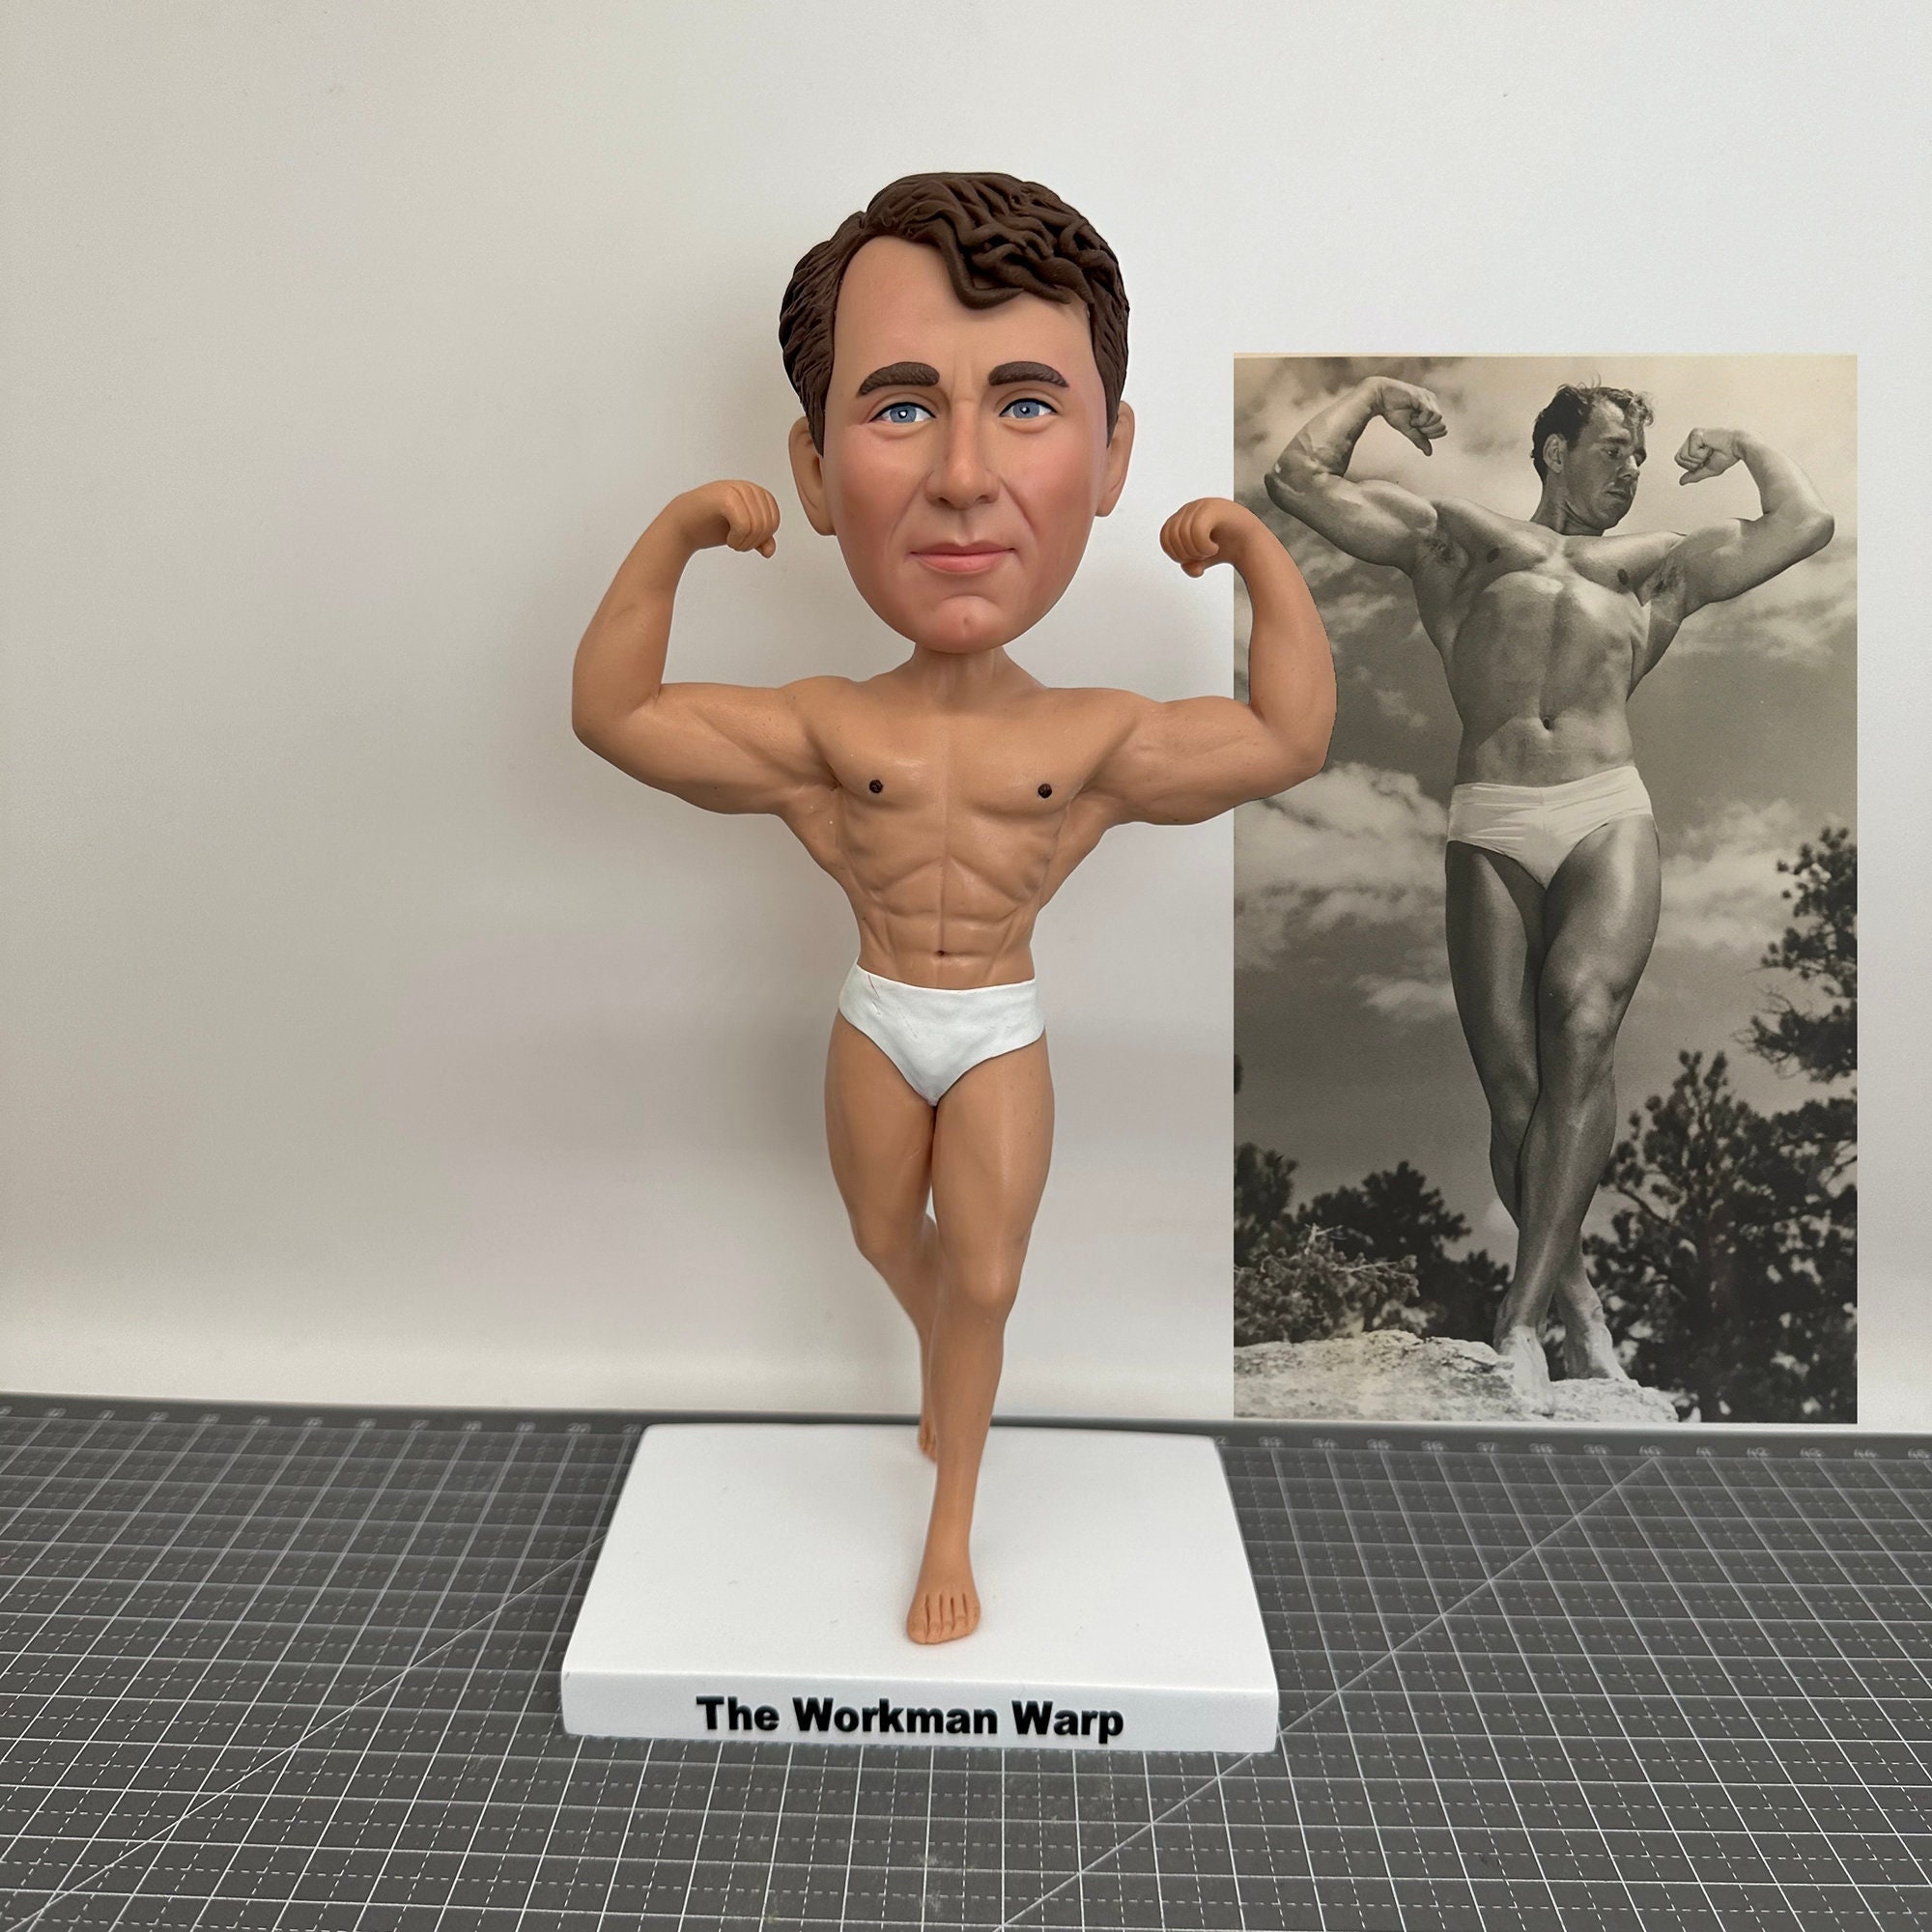 Wood Carving Bodybuilder Figurine Sculpture Wooden Statue Display Art for  Home Adorns Birthday Holiday Gift 